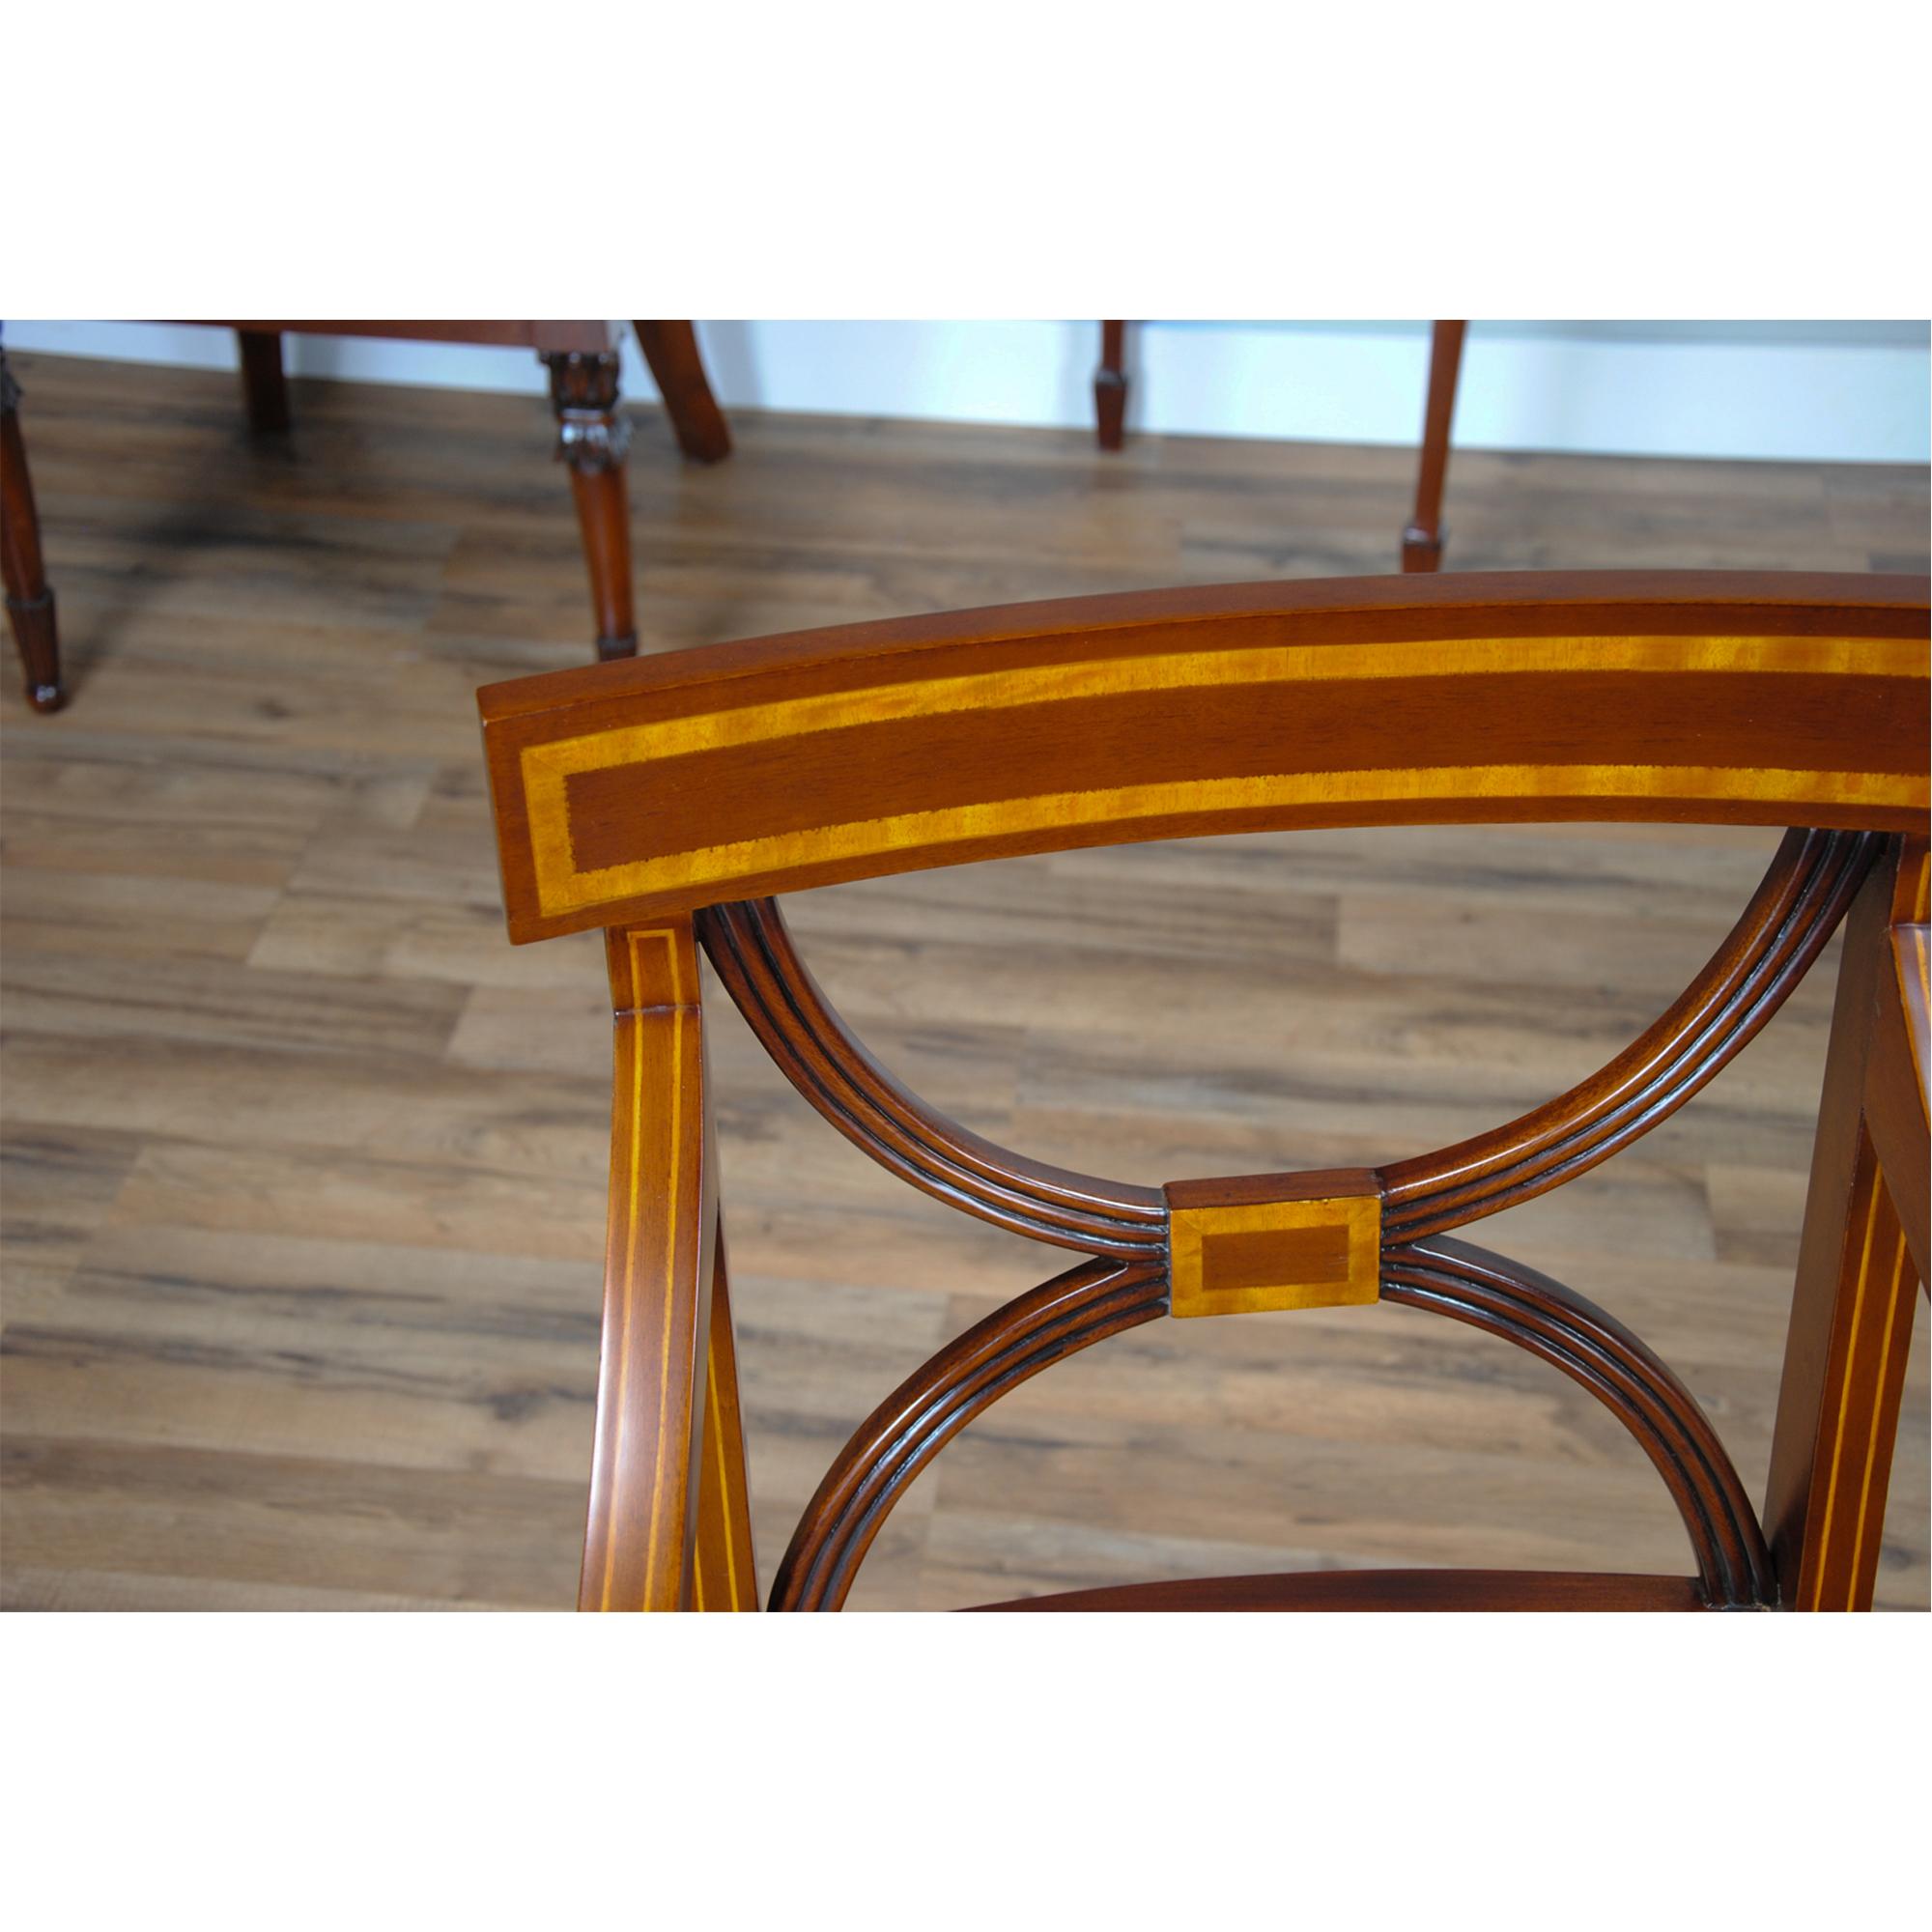 Sheraton Inlaid Mahogany Chairs, Set of 10 In New Condition For Sale In Annville, PA